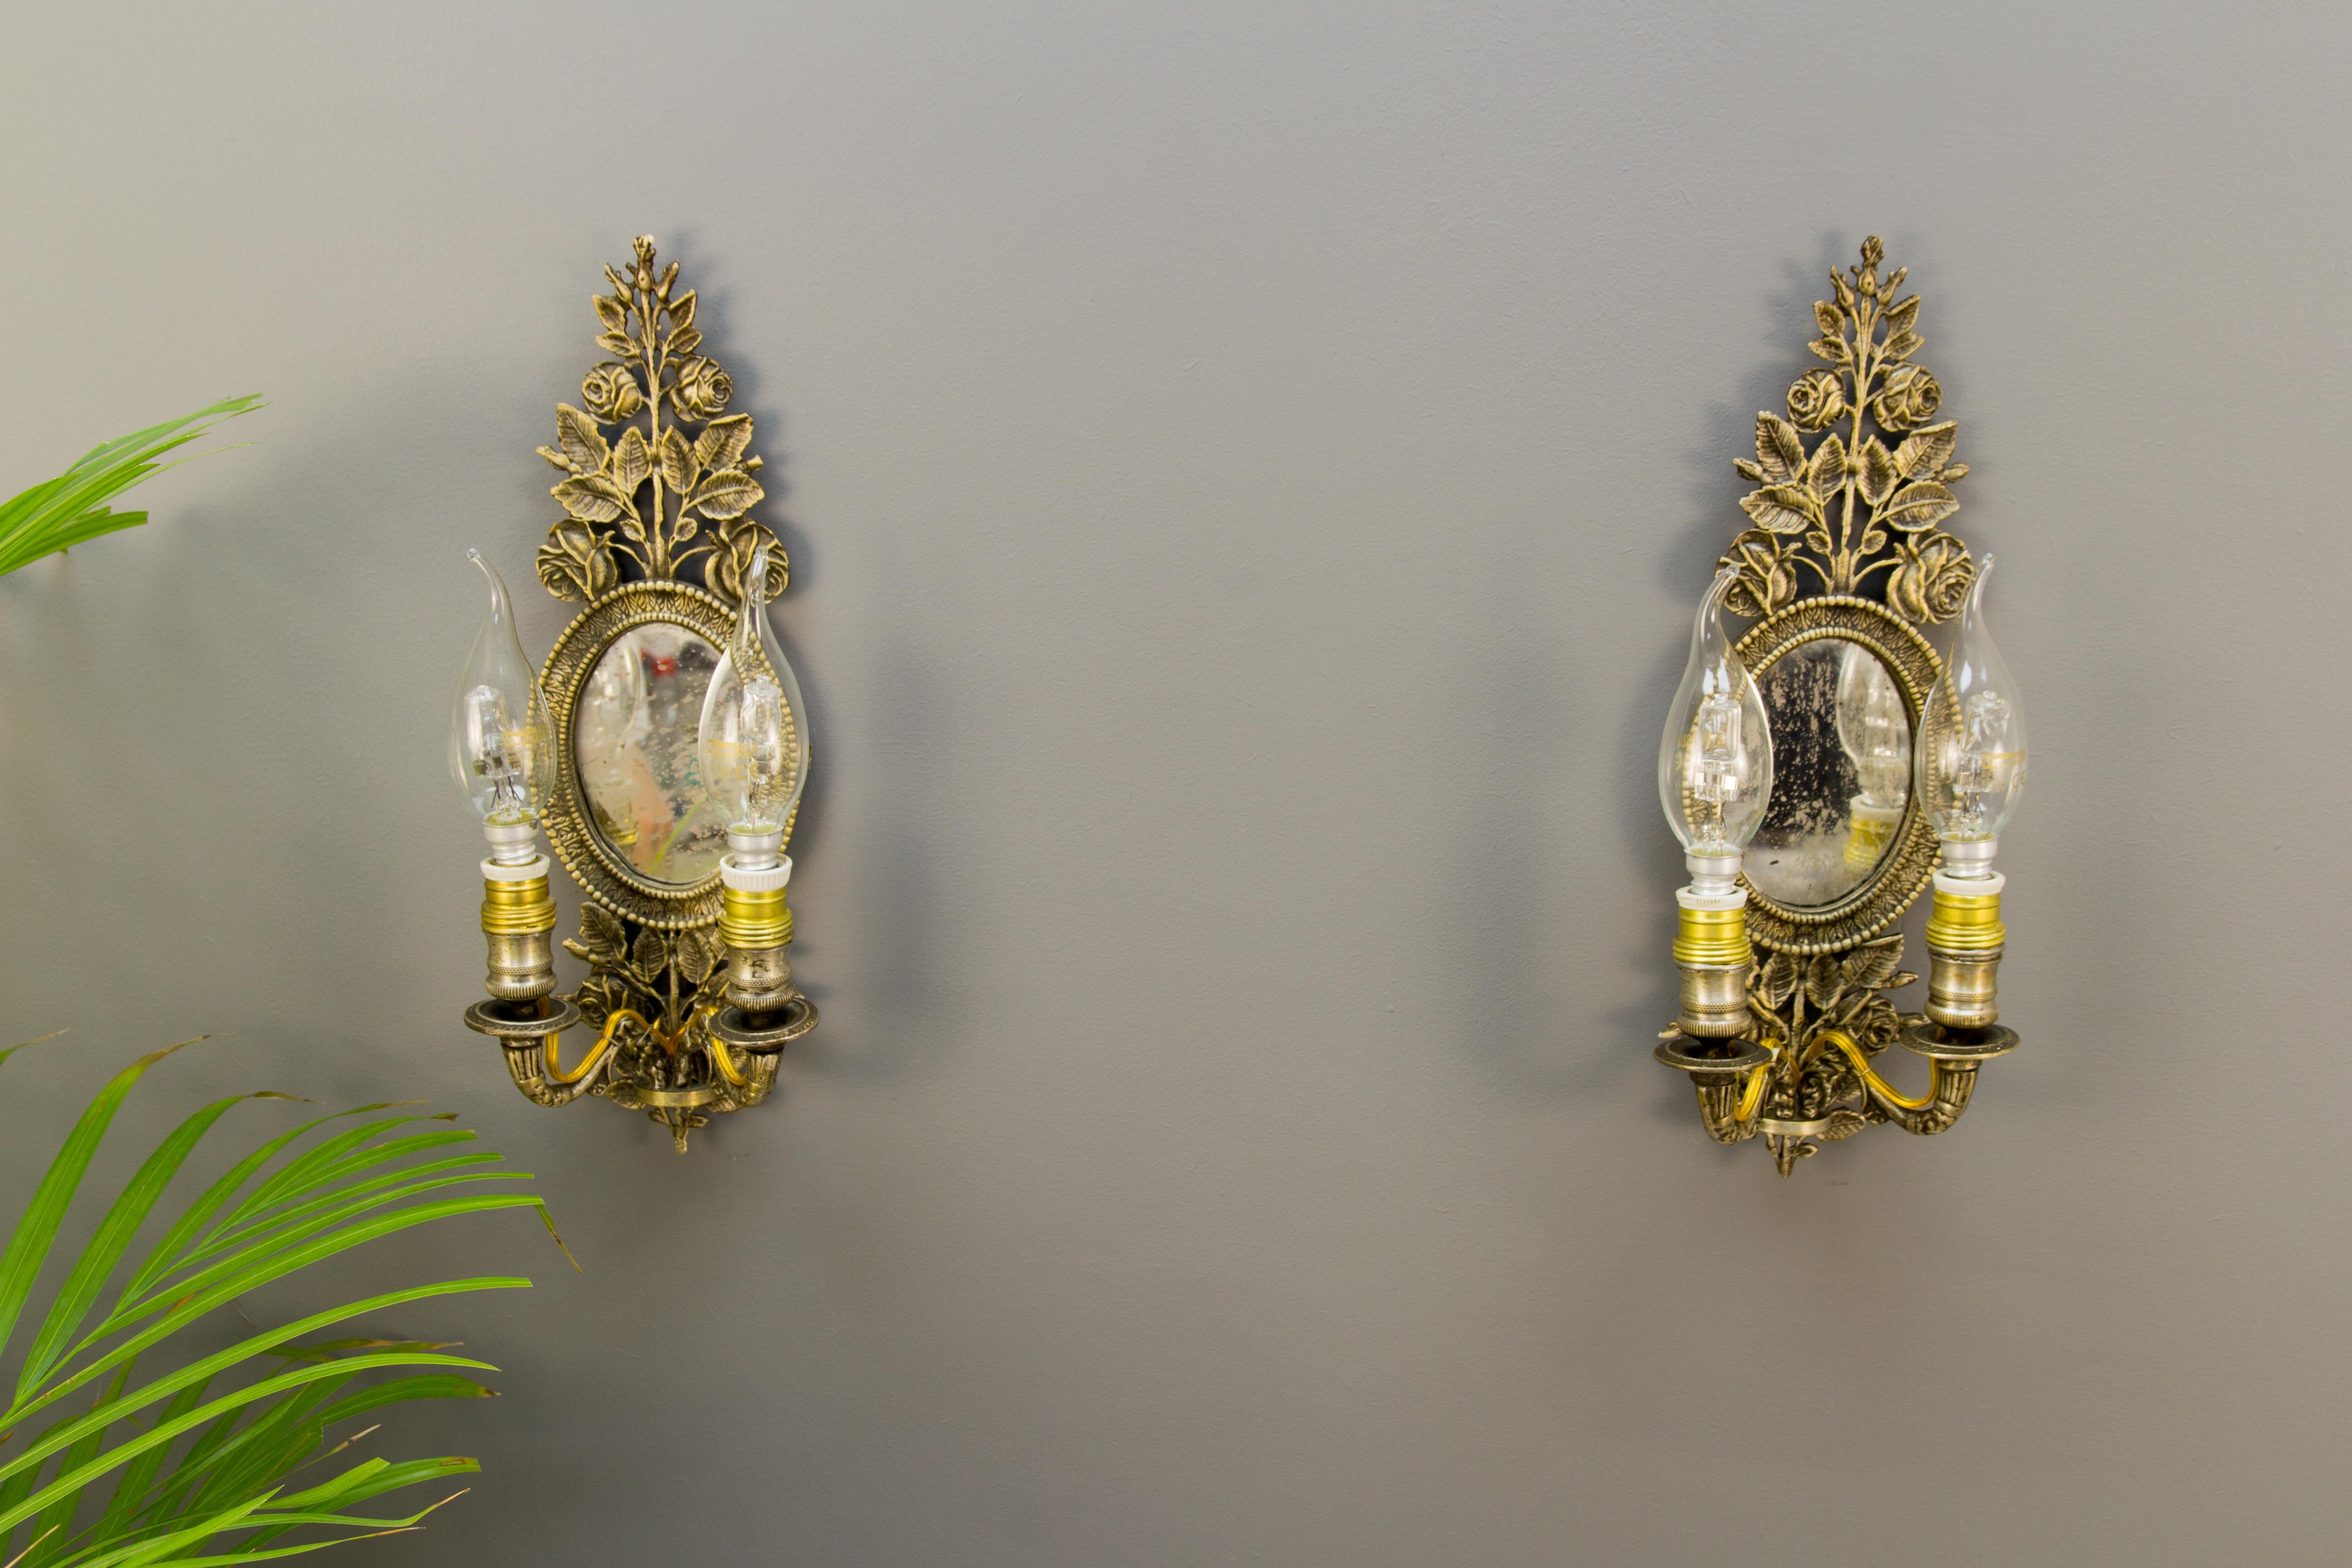 A pair of small but very fine antique French wall sconces with oval framed mirrors and beautiful floral details, roses. Originally crafted for two candles each, these antique bronze wall lights have been previously electrified, now each has two